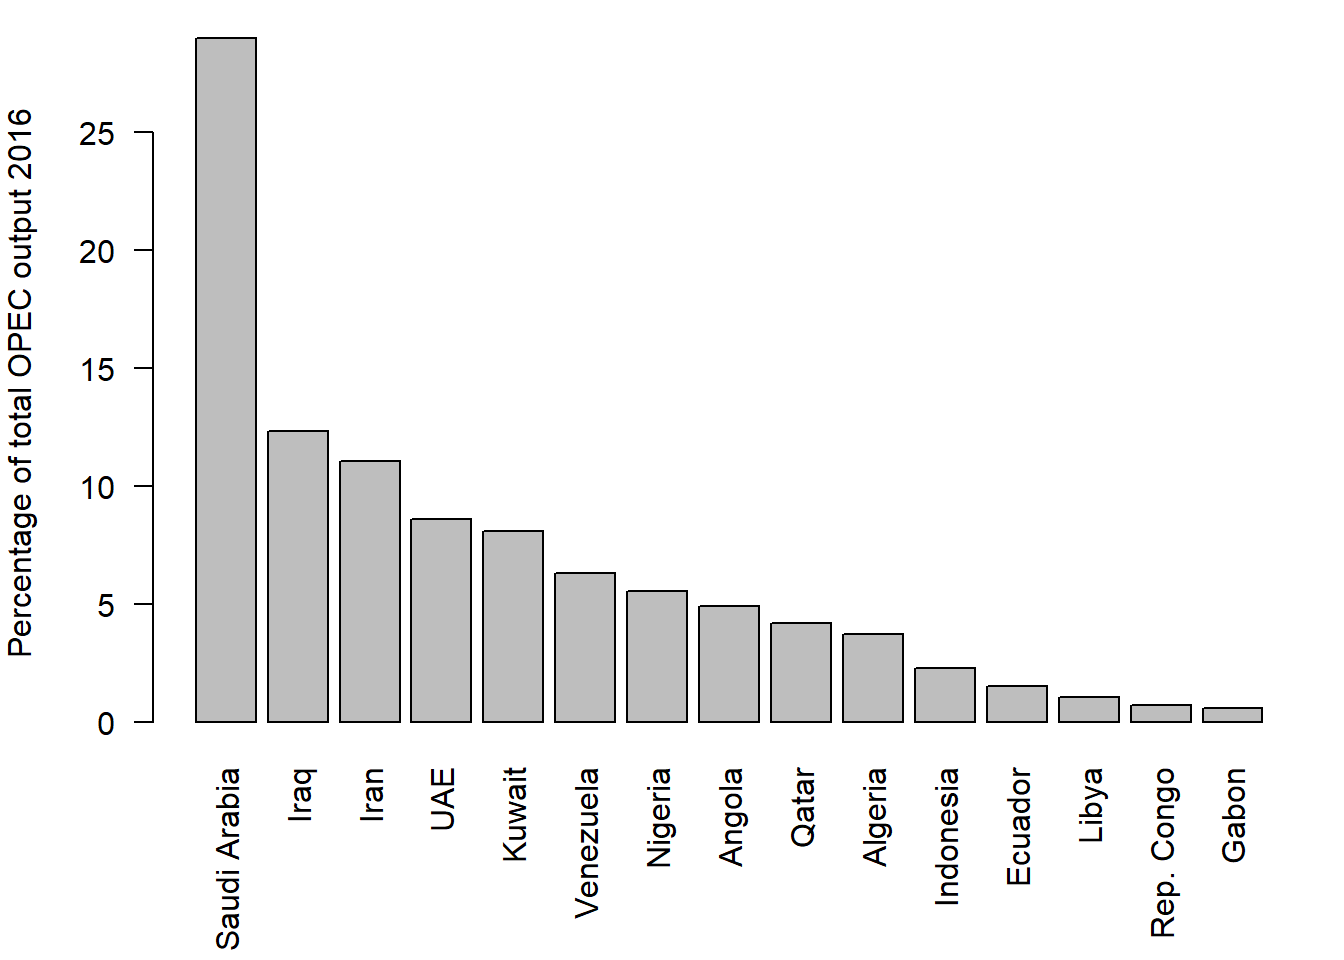 Bar chart of oil production by OPEC members